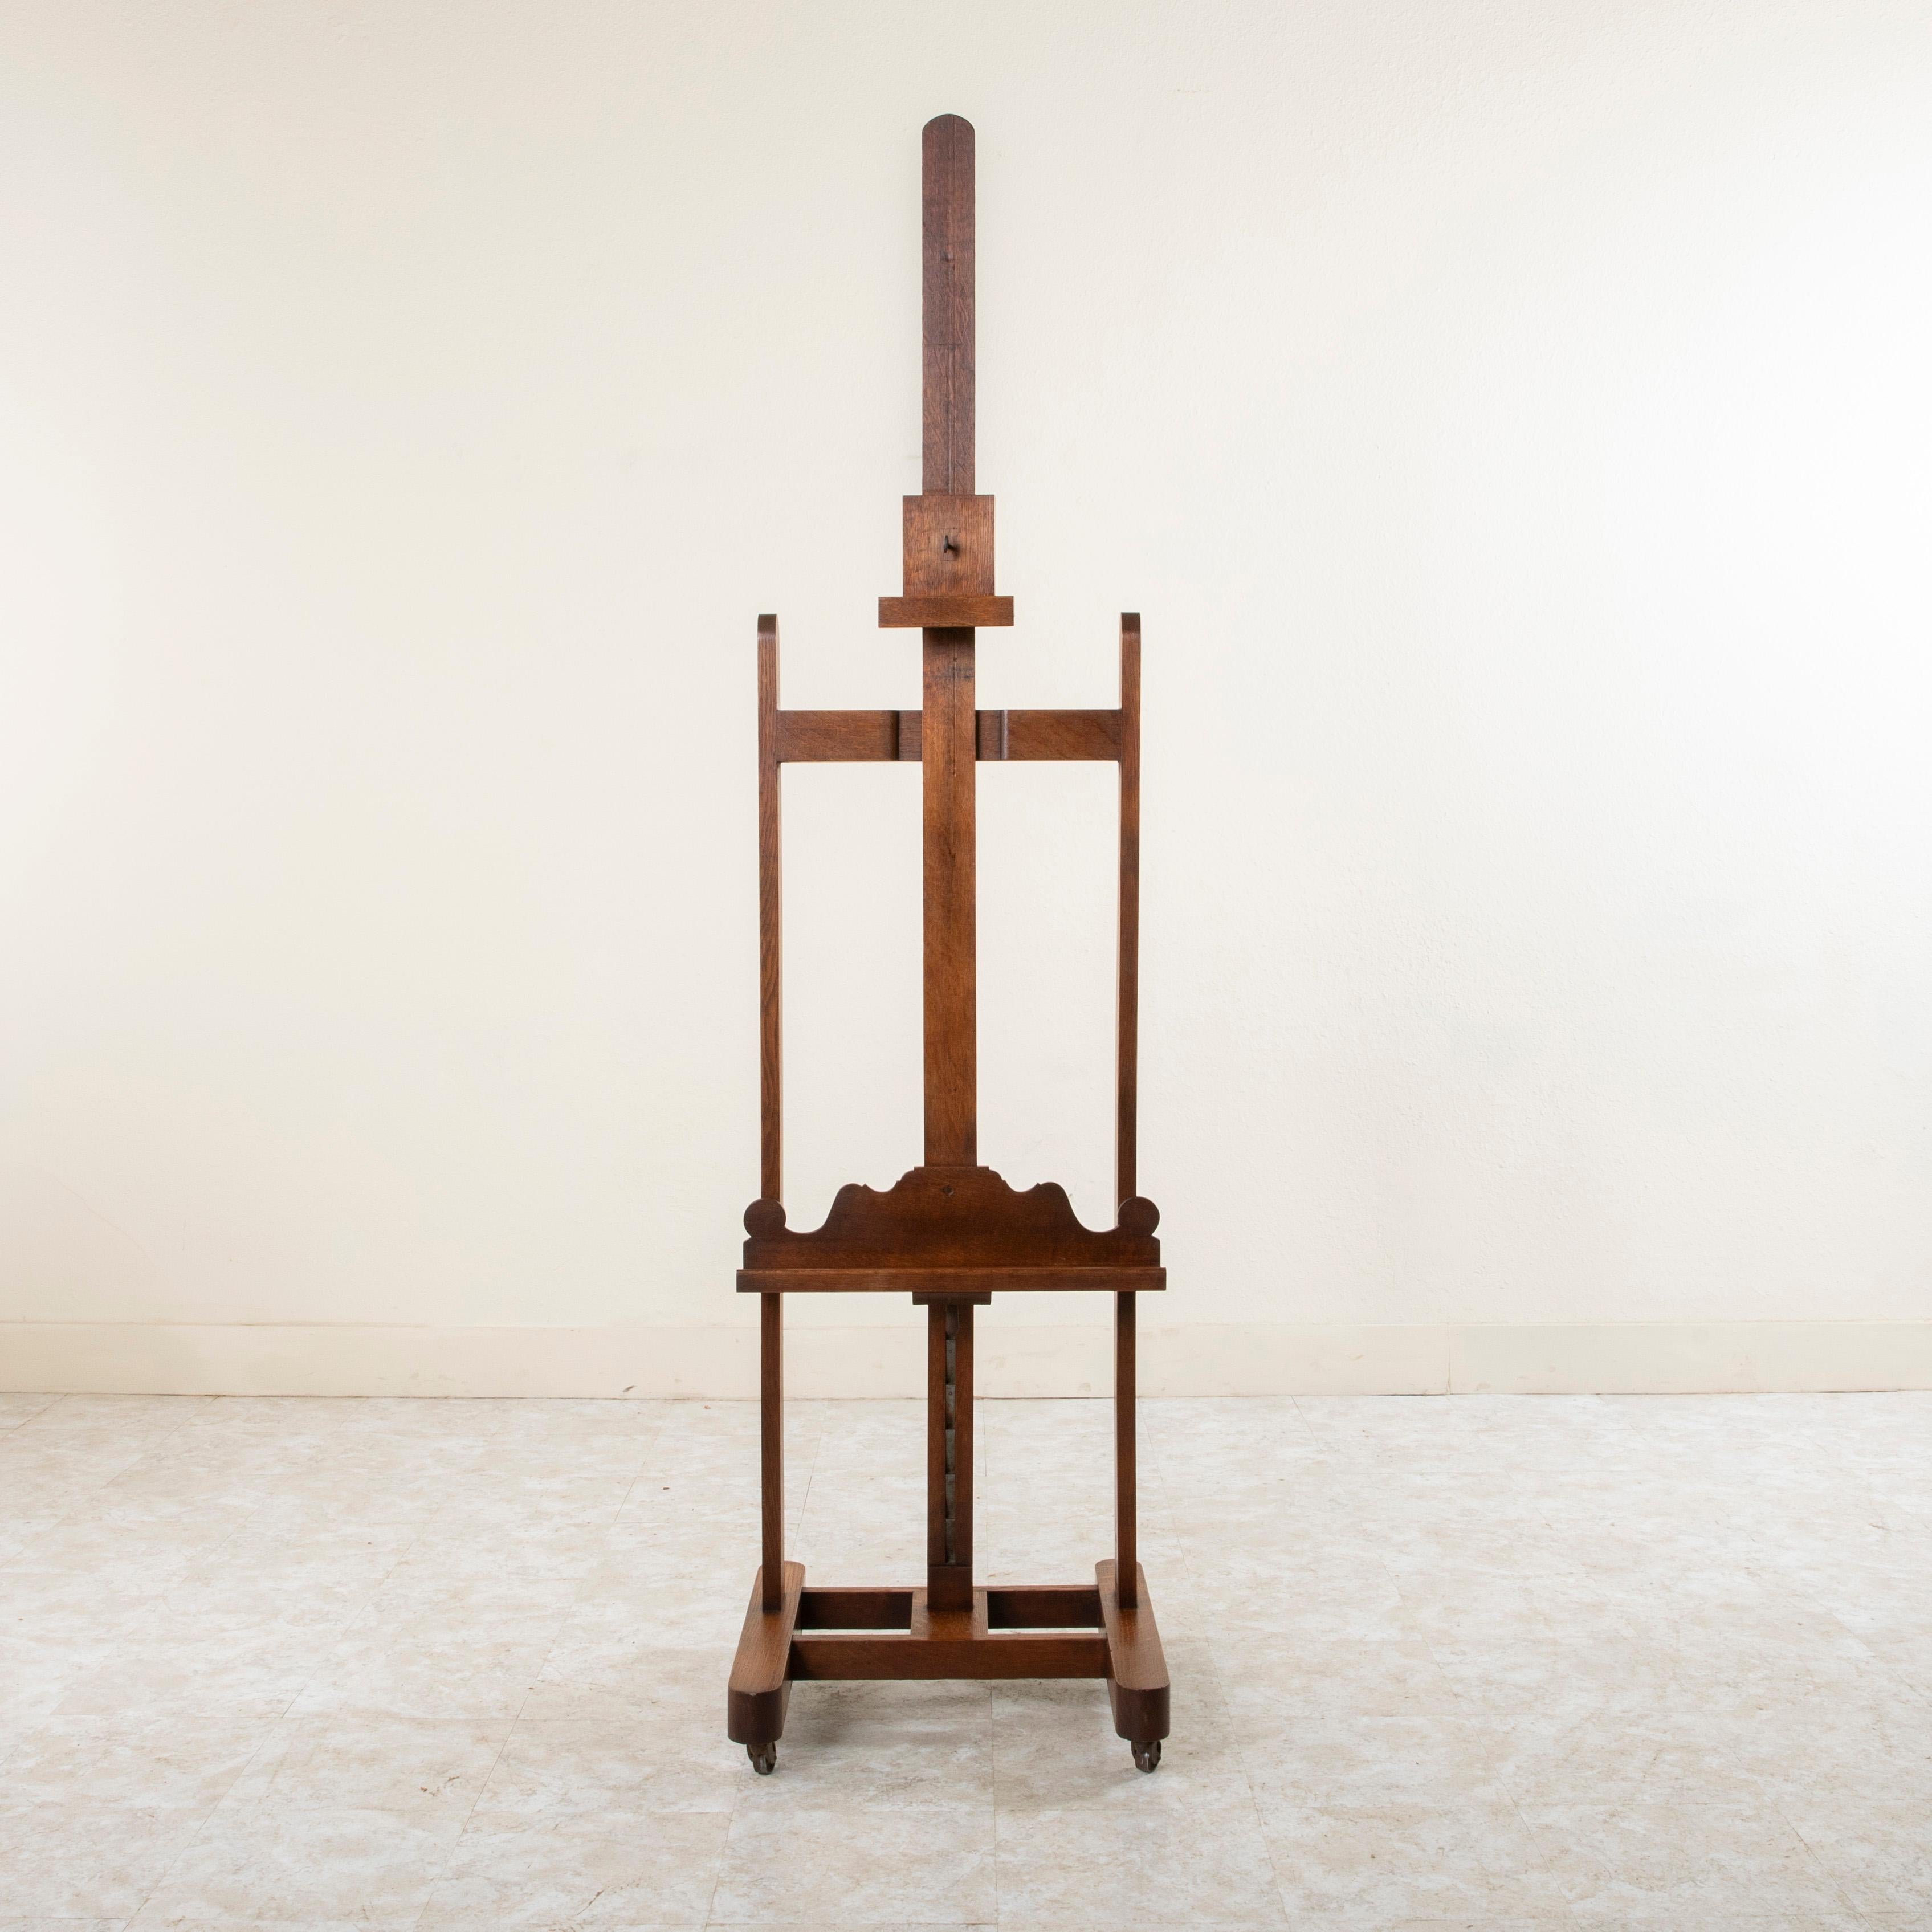 This French oak artist's floor easel from the turn of the twentieth century features iron casters and an iron pull lever mechanism that allows for an adjustable height of 67 to 102 inches. Its 3.5 inch deep tray allows for larger canvases to be